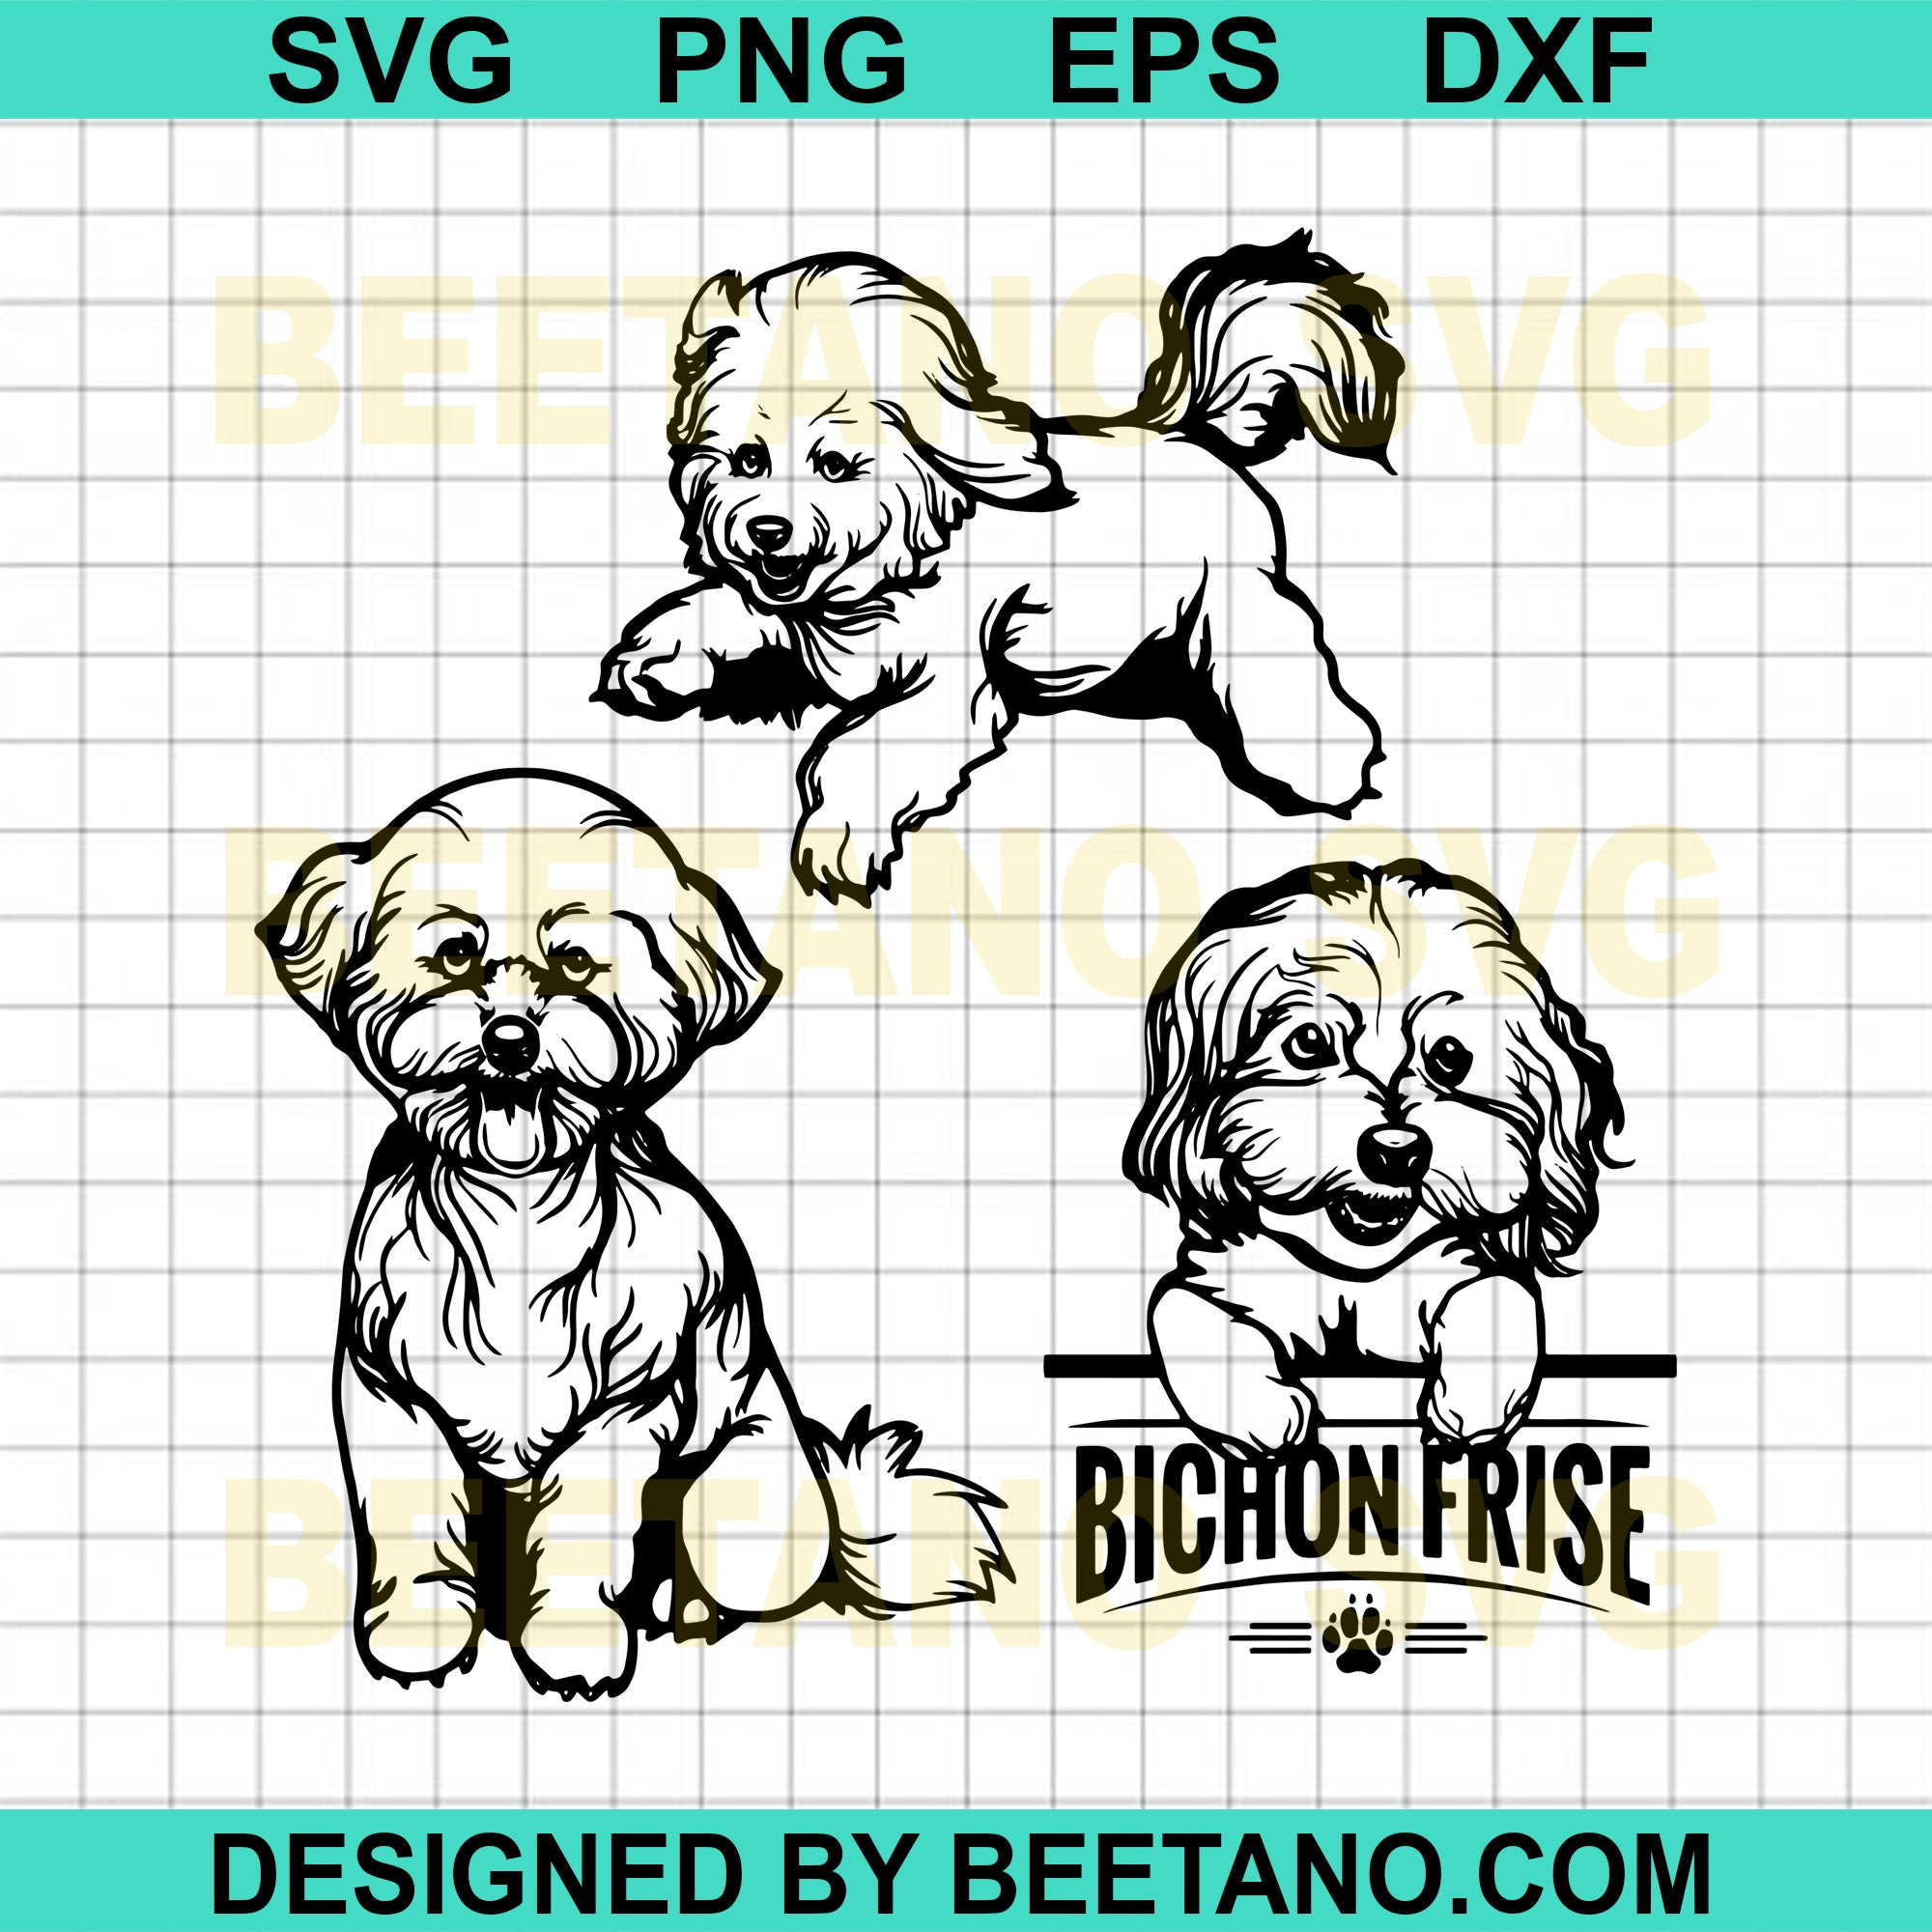 Download Bichon Frise Dog High Quality Svg Cut Files Best For Handmade Unique Craft